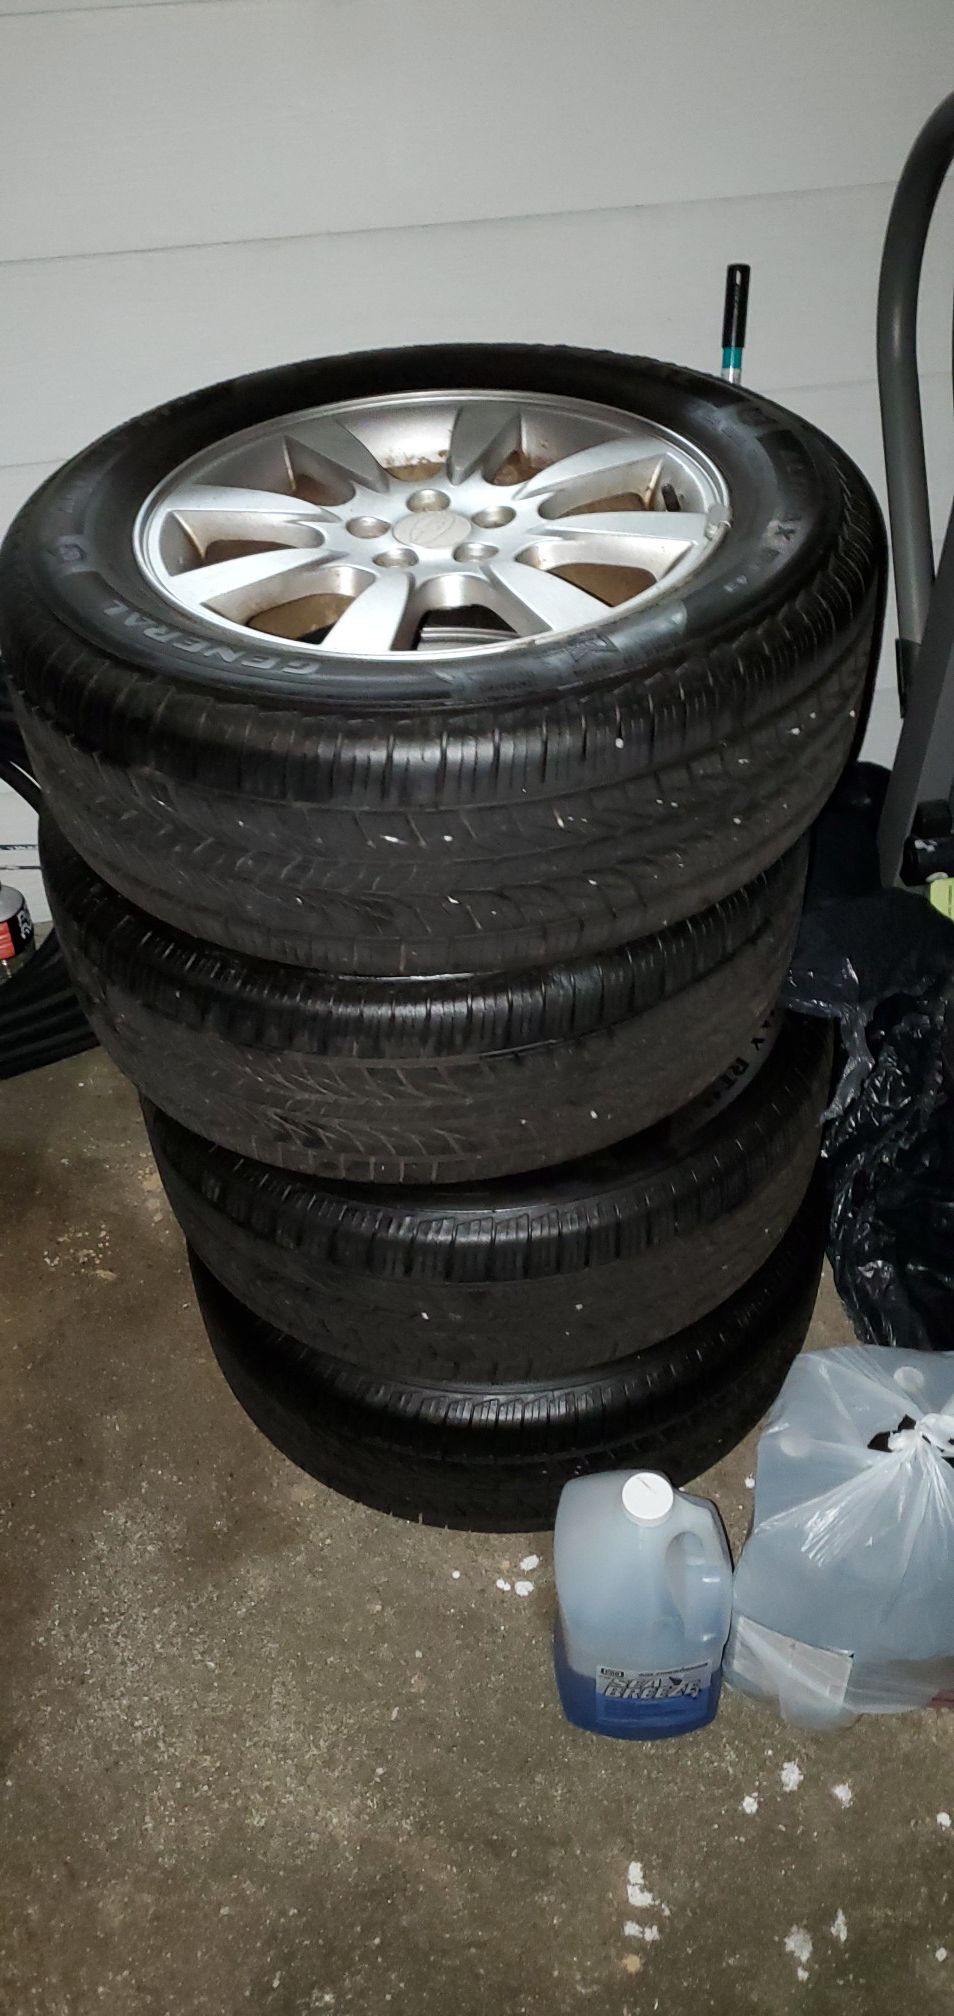 2006 subaru forester stocks rims with new tired